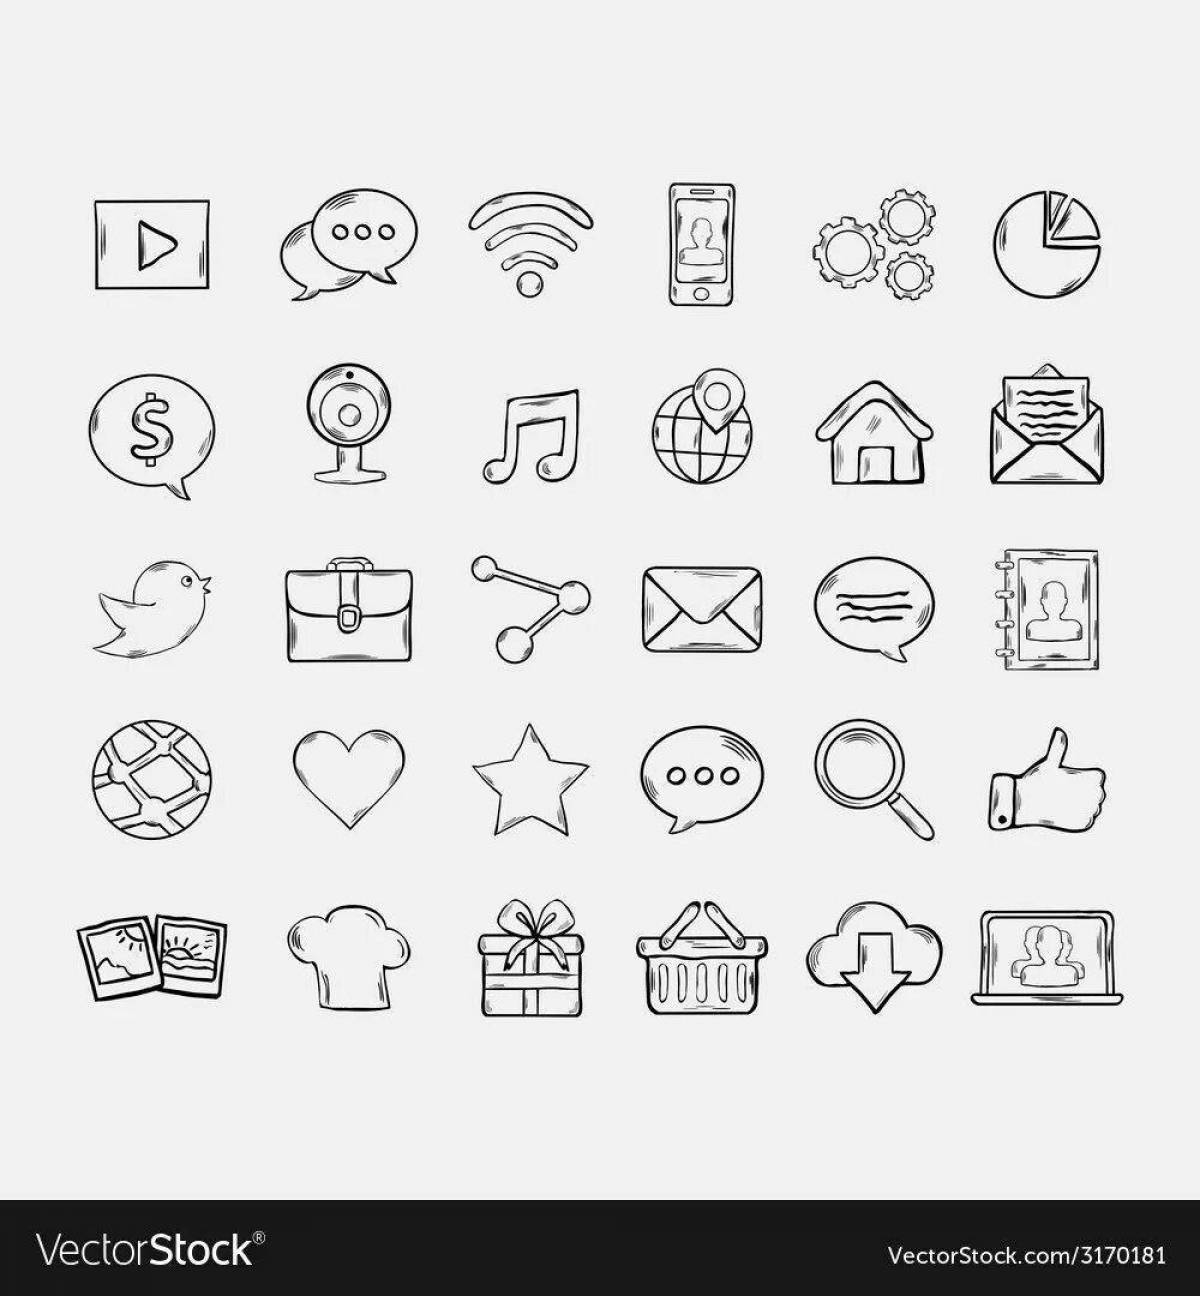 Playful coloring icons